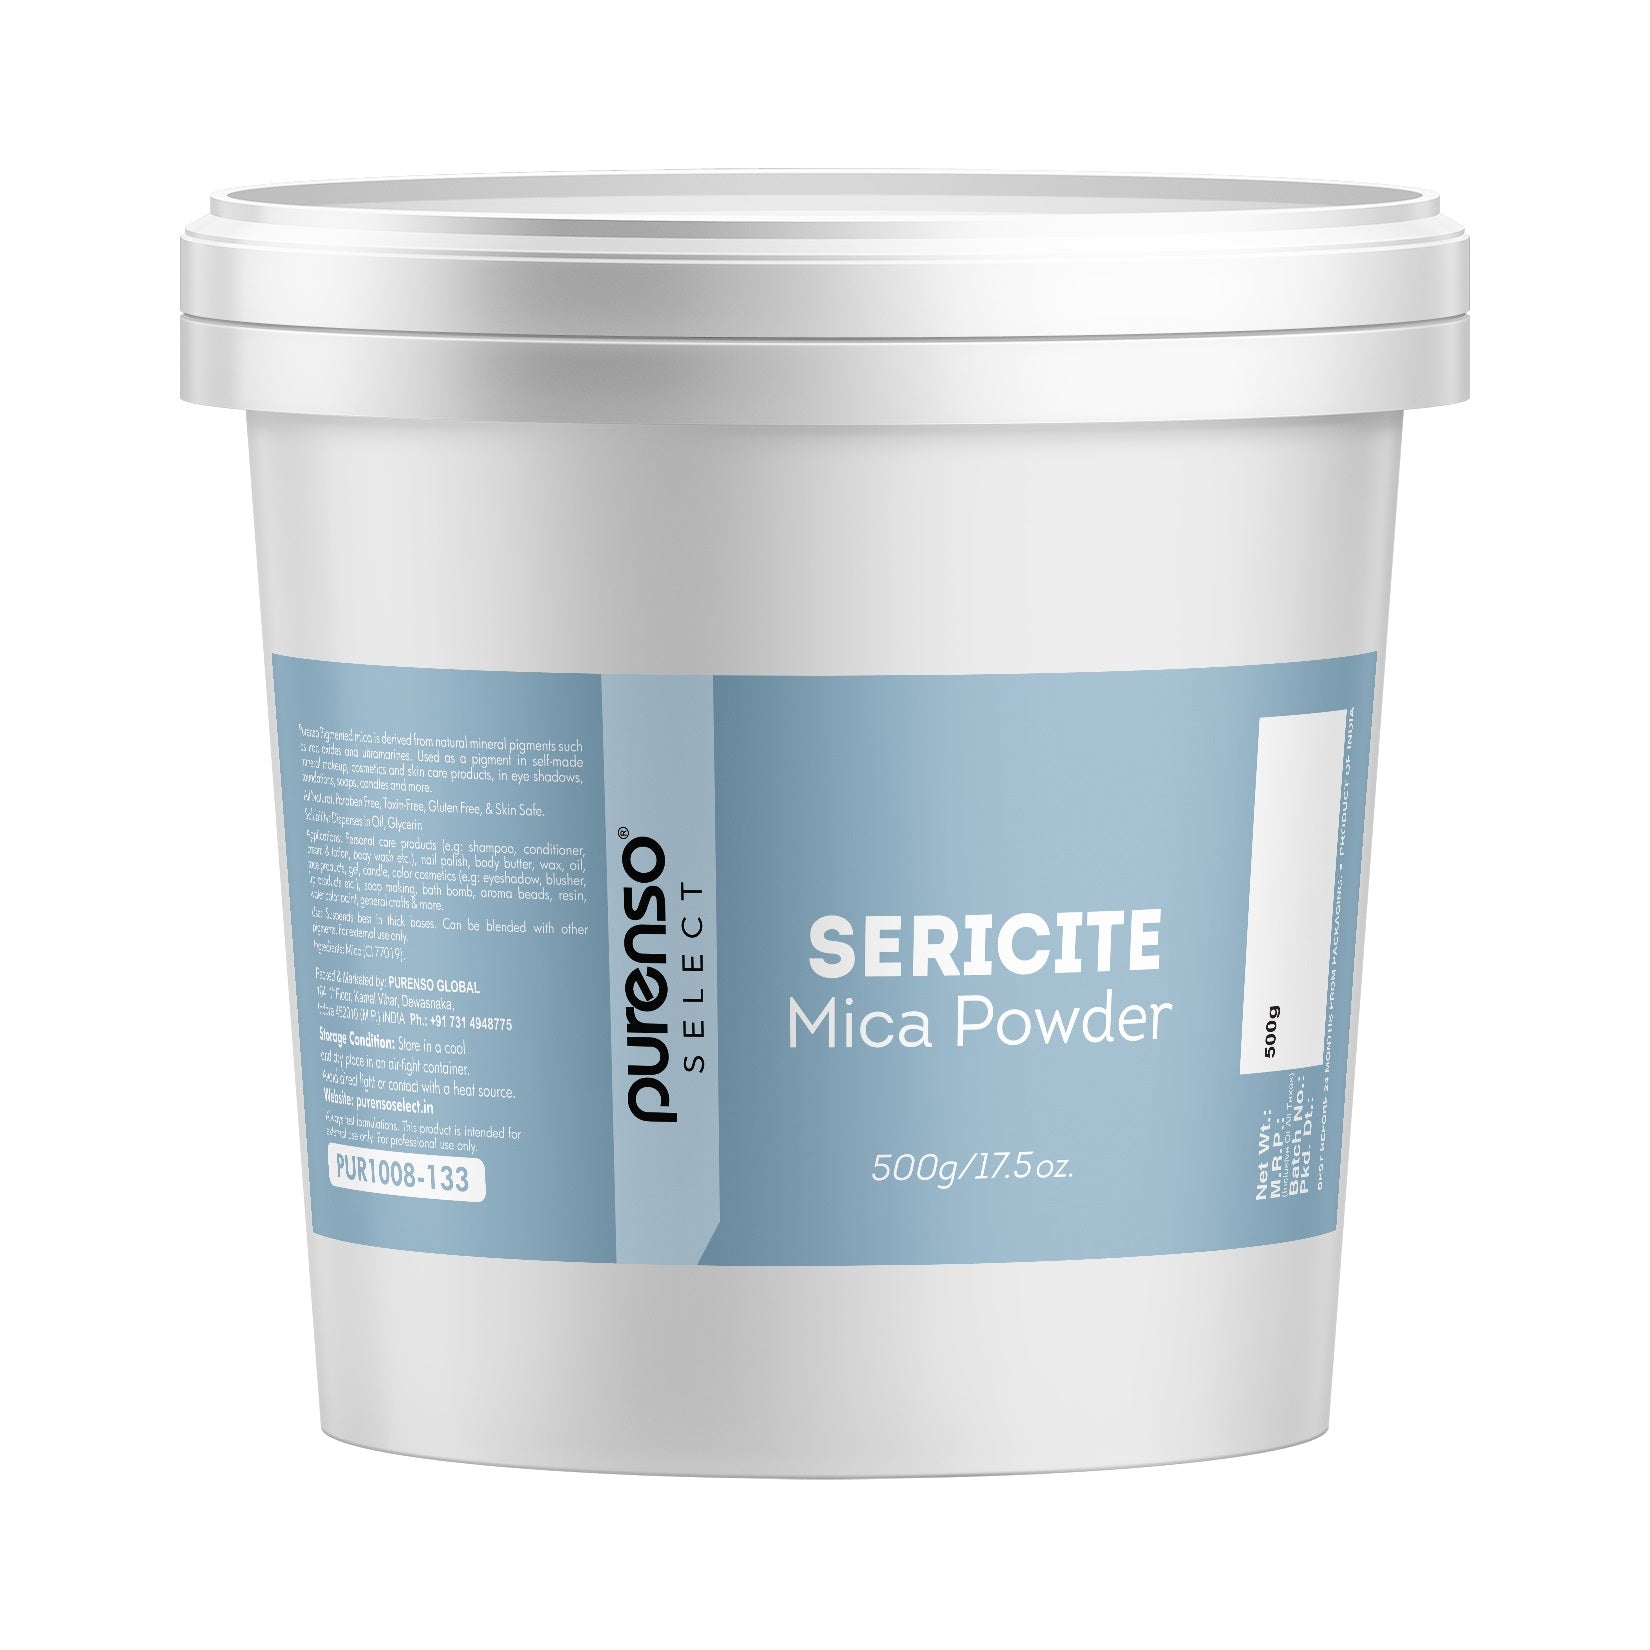 Buy Sericite Mica Powder online in India I Purenso Select